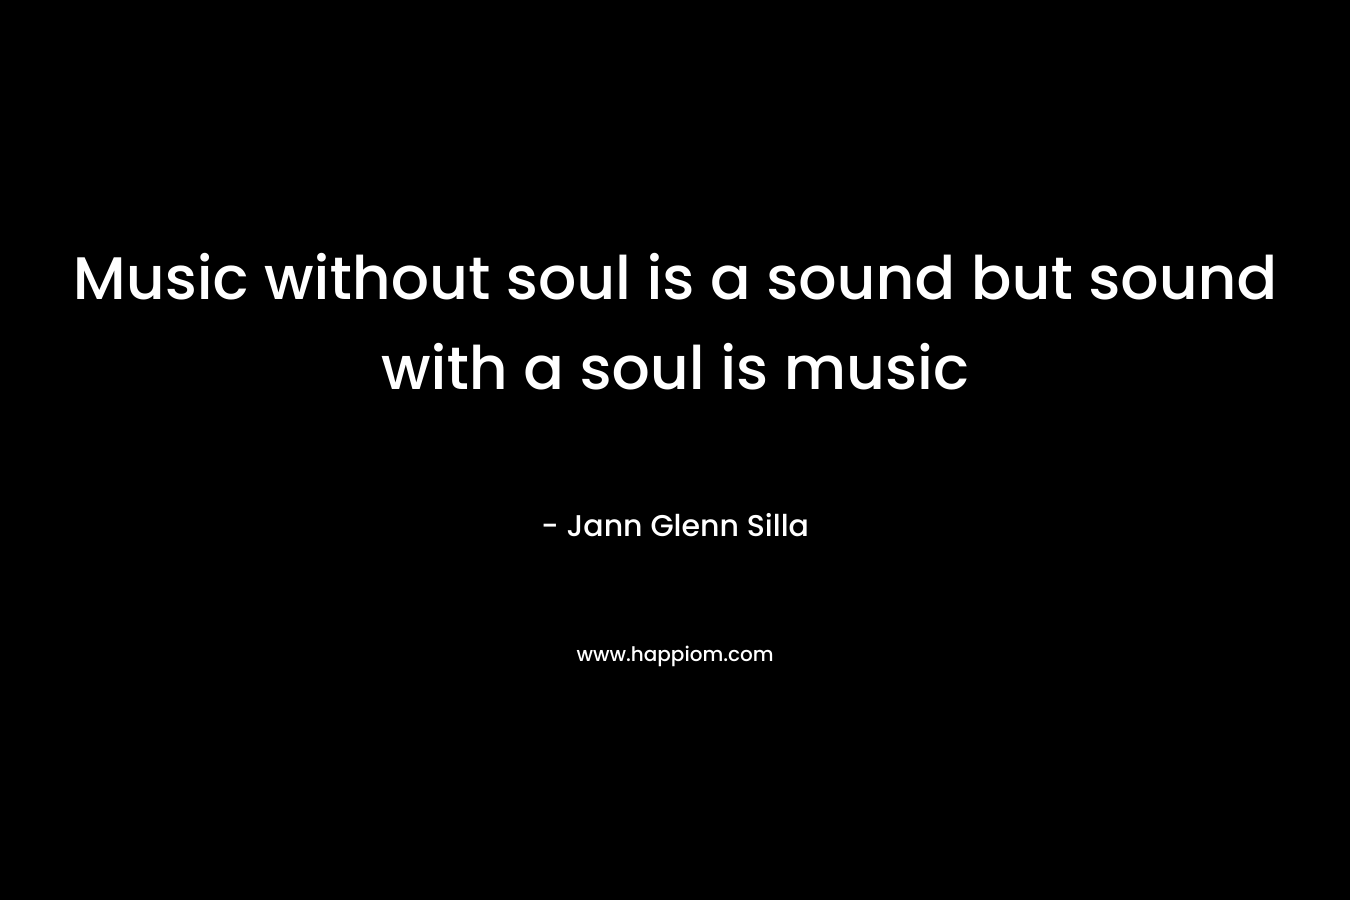 Music without soul is a sound but sound with a soul is music